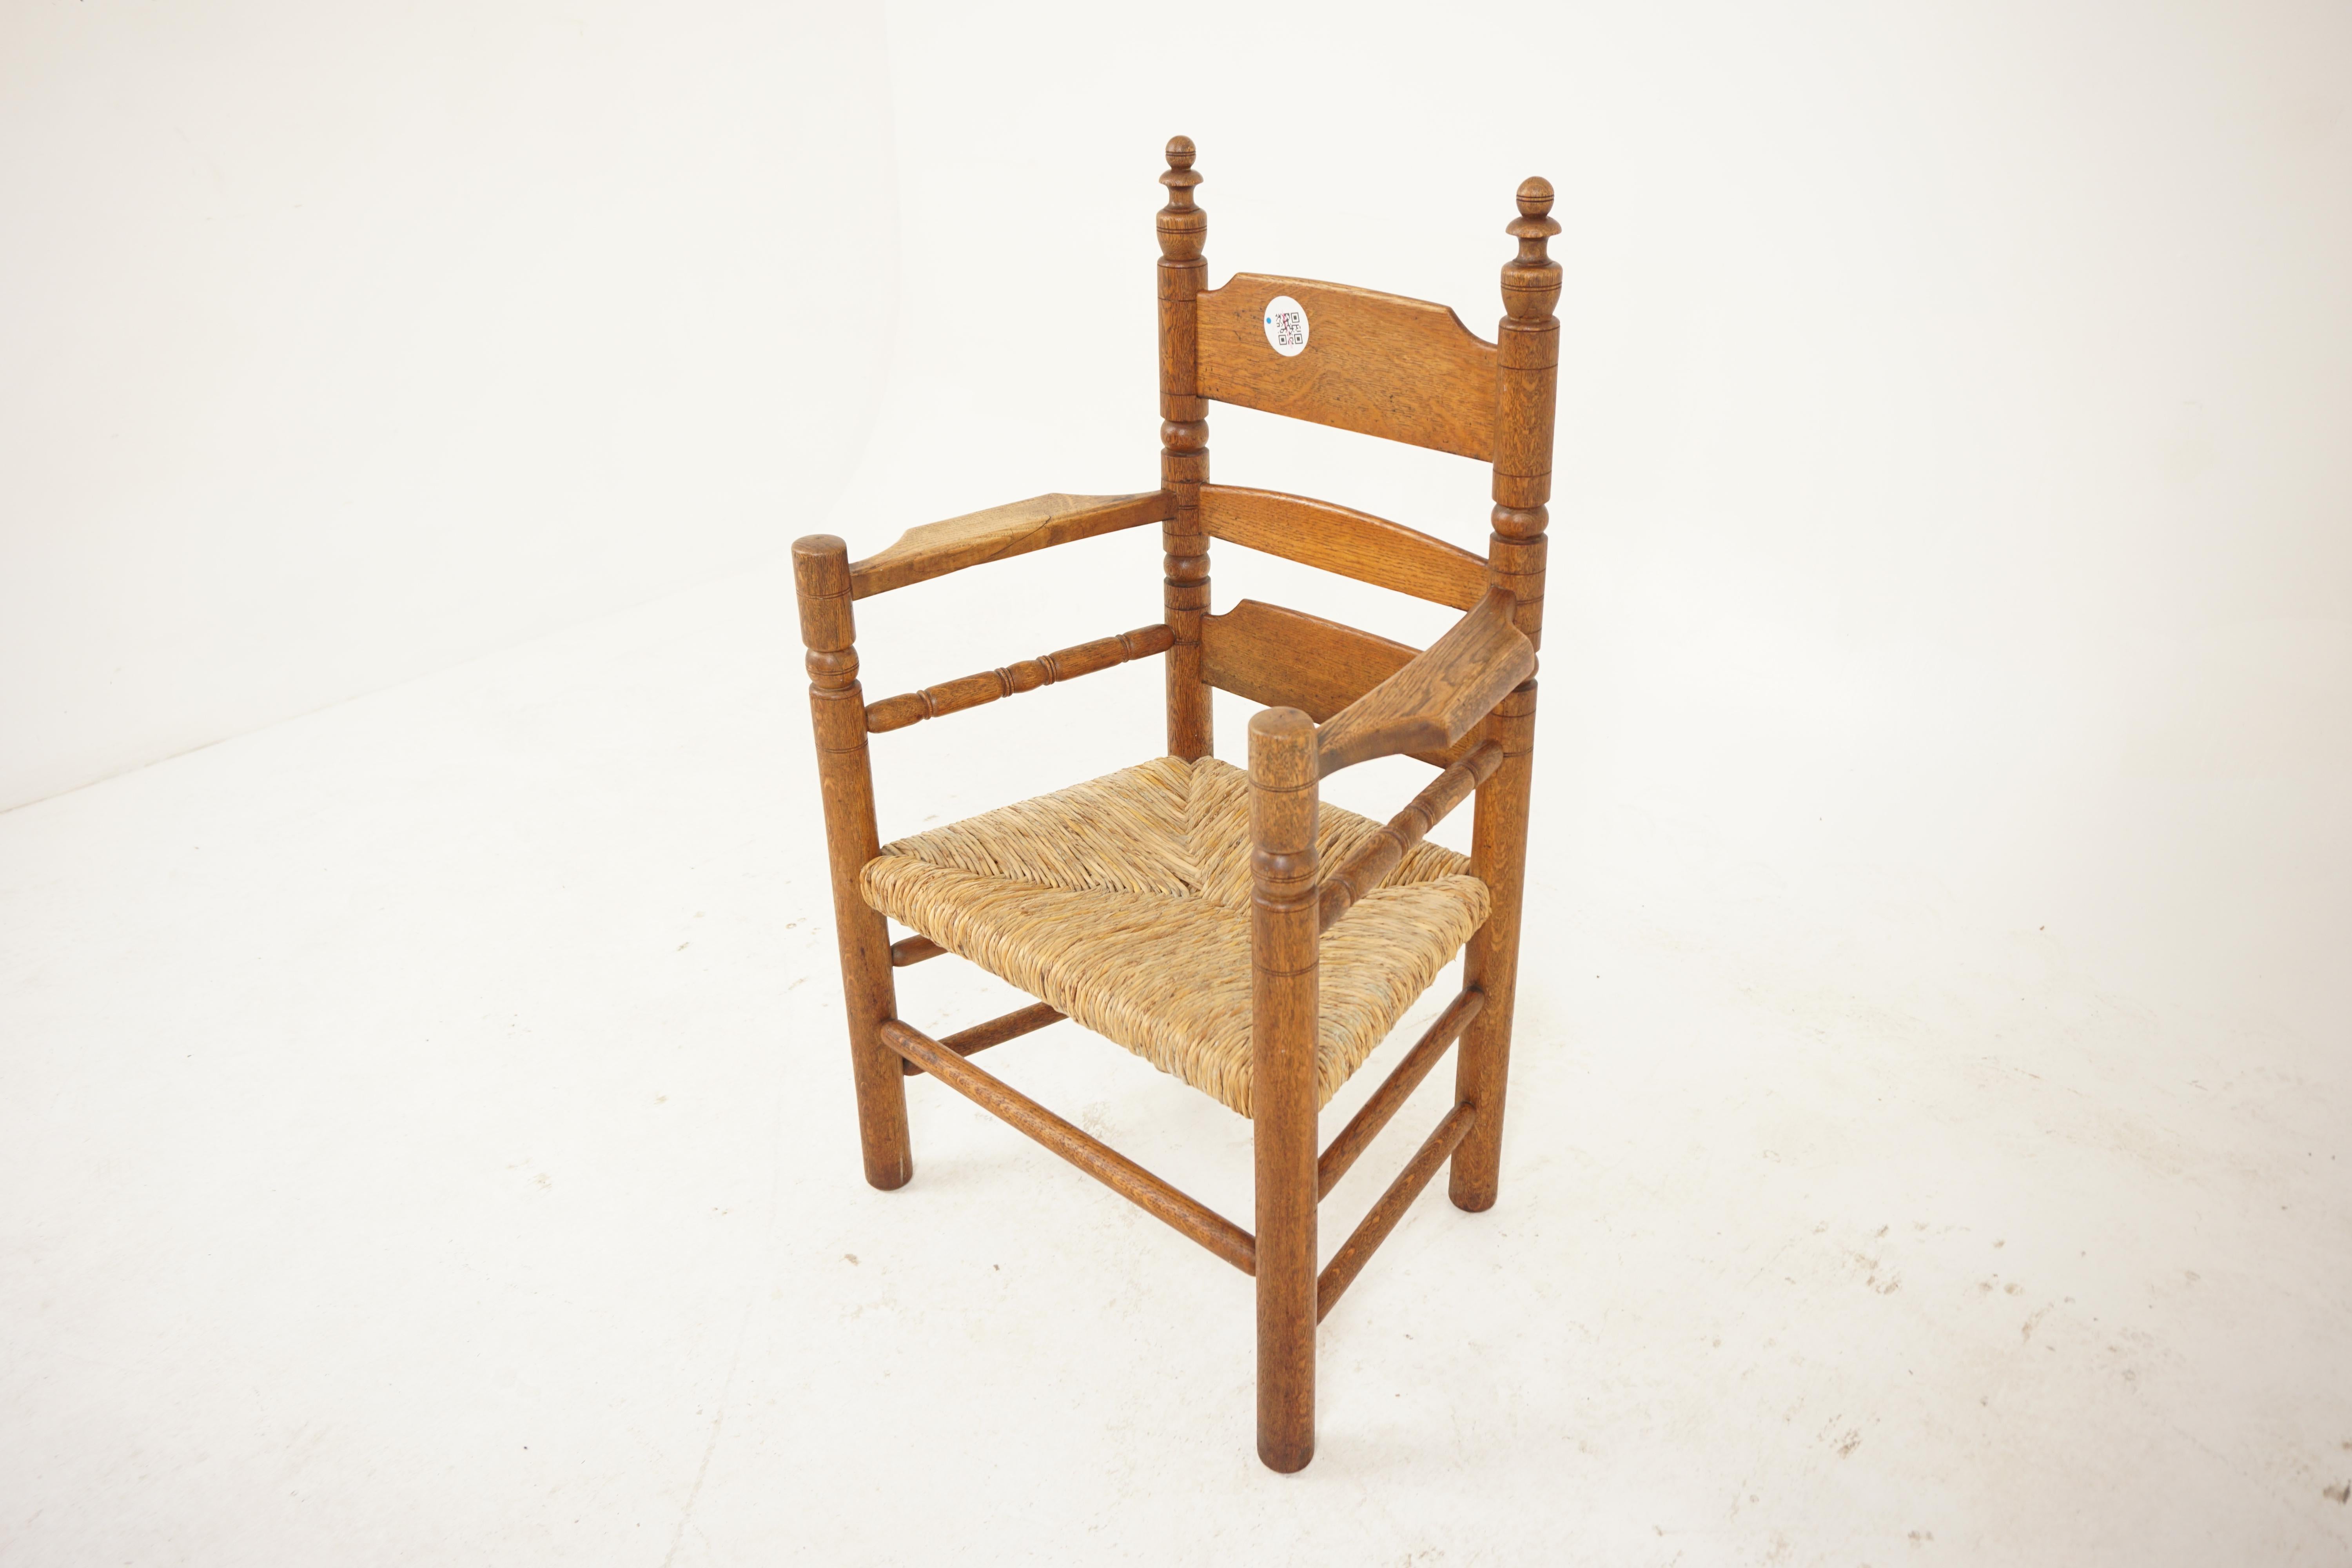 19th Century ladder back rush seat arm seat arm chair, Scotland 1910, H091

Scotland 1910
Solid oak
Original finish
The back has three shaped ladders
Turned supports on the end with finials on top
Shaped out swept arms that are supported at the